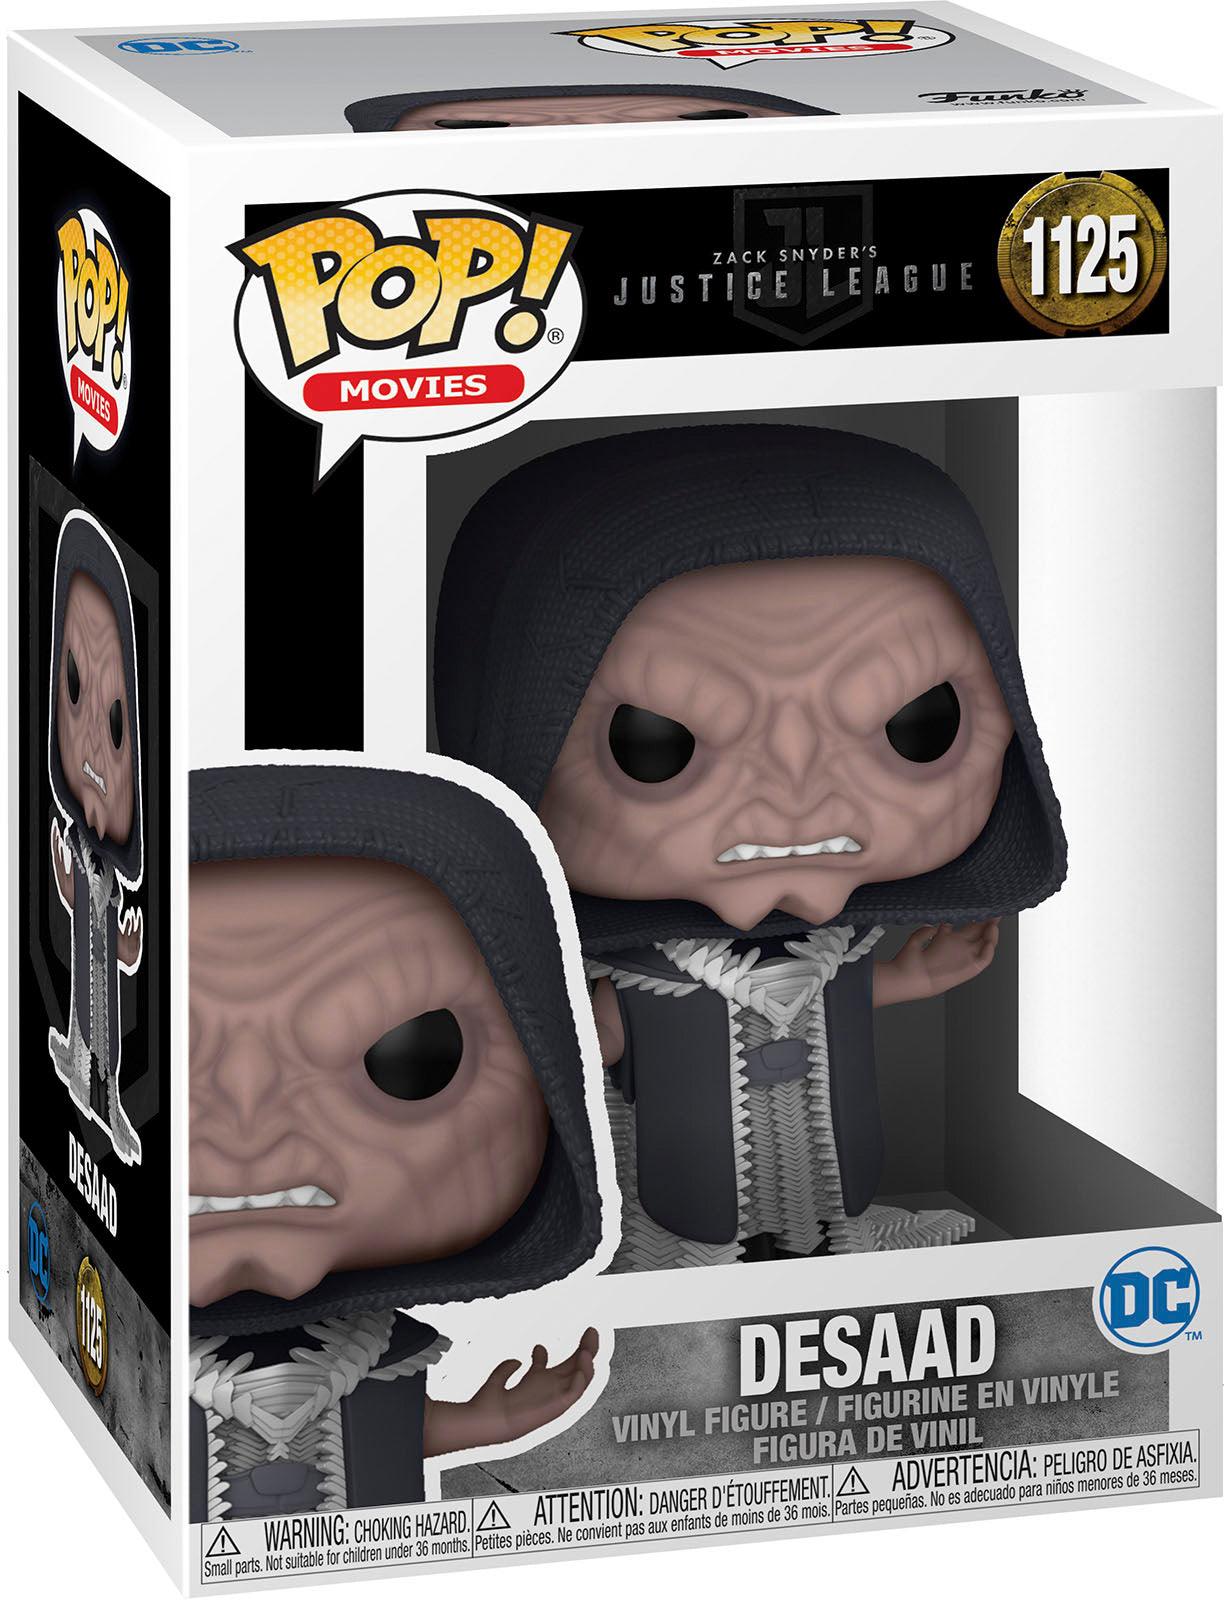 Pop! Movies - DC - Zack Snyder's Justice League - Desaad - #1125 - Hobby Champion Inc